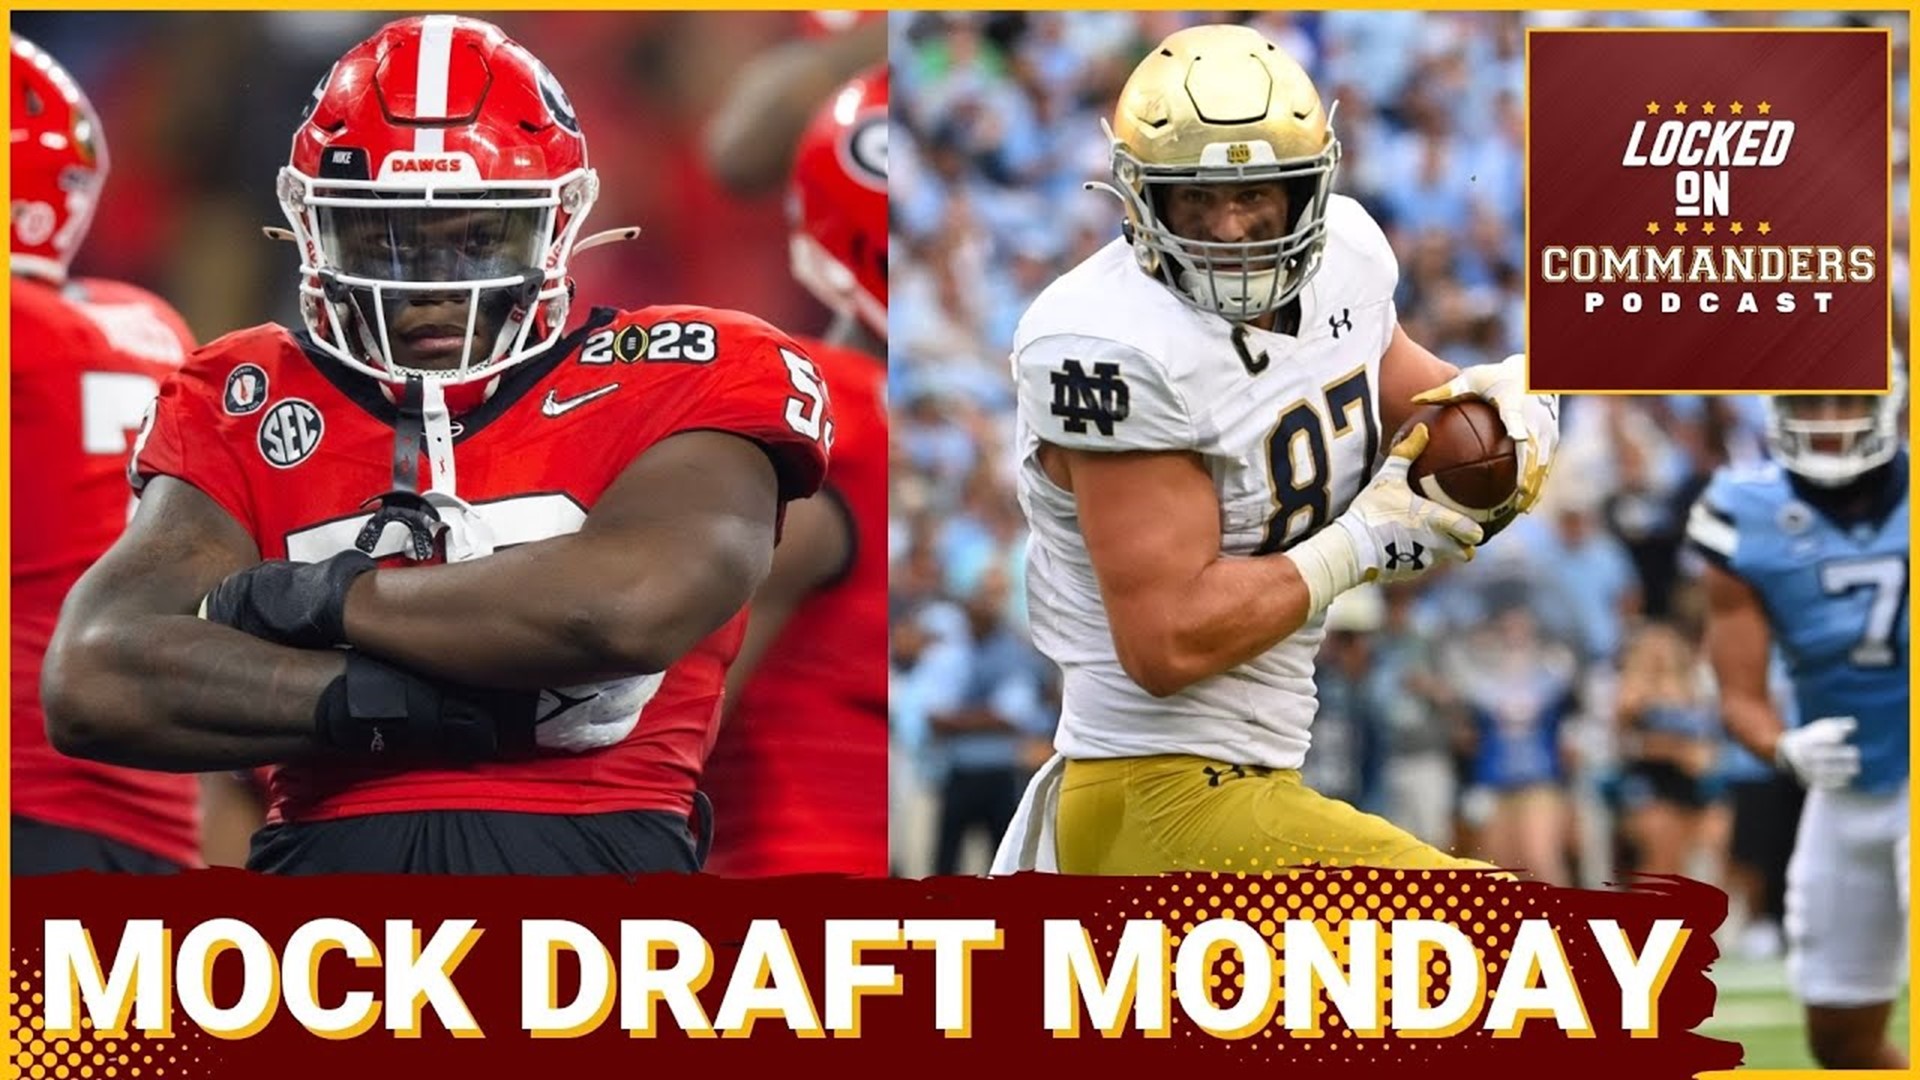 Our first Mock Draft Monday of the year features a first-round, no trade, version with the Commanders taking a potential game-changer with the 16th overall pick.